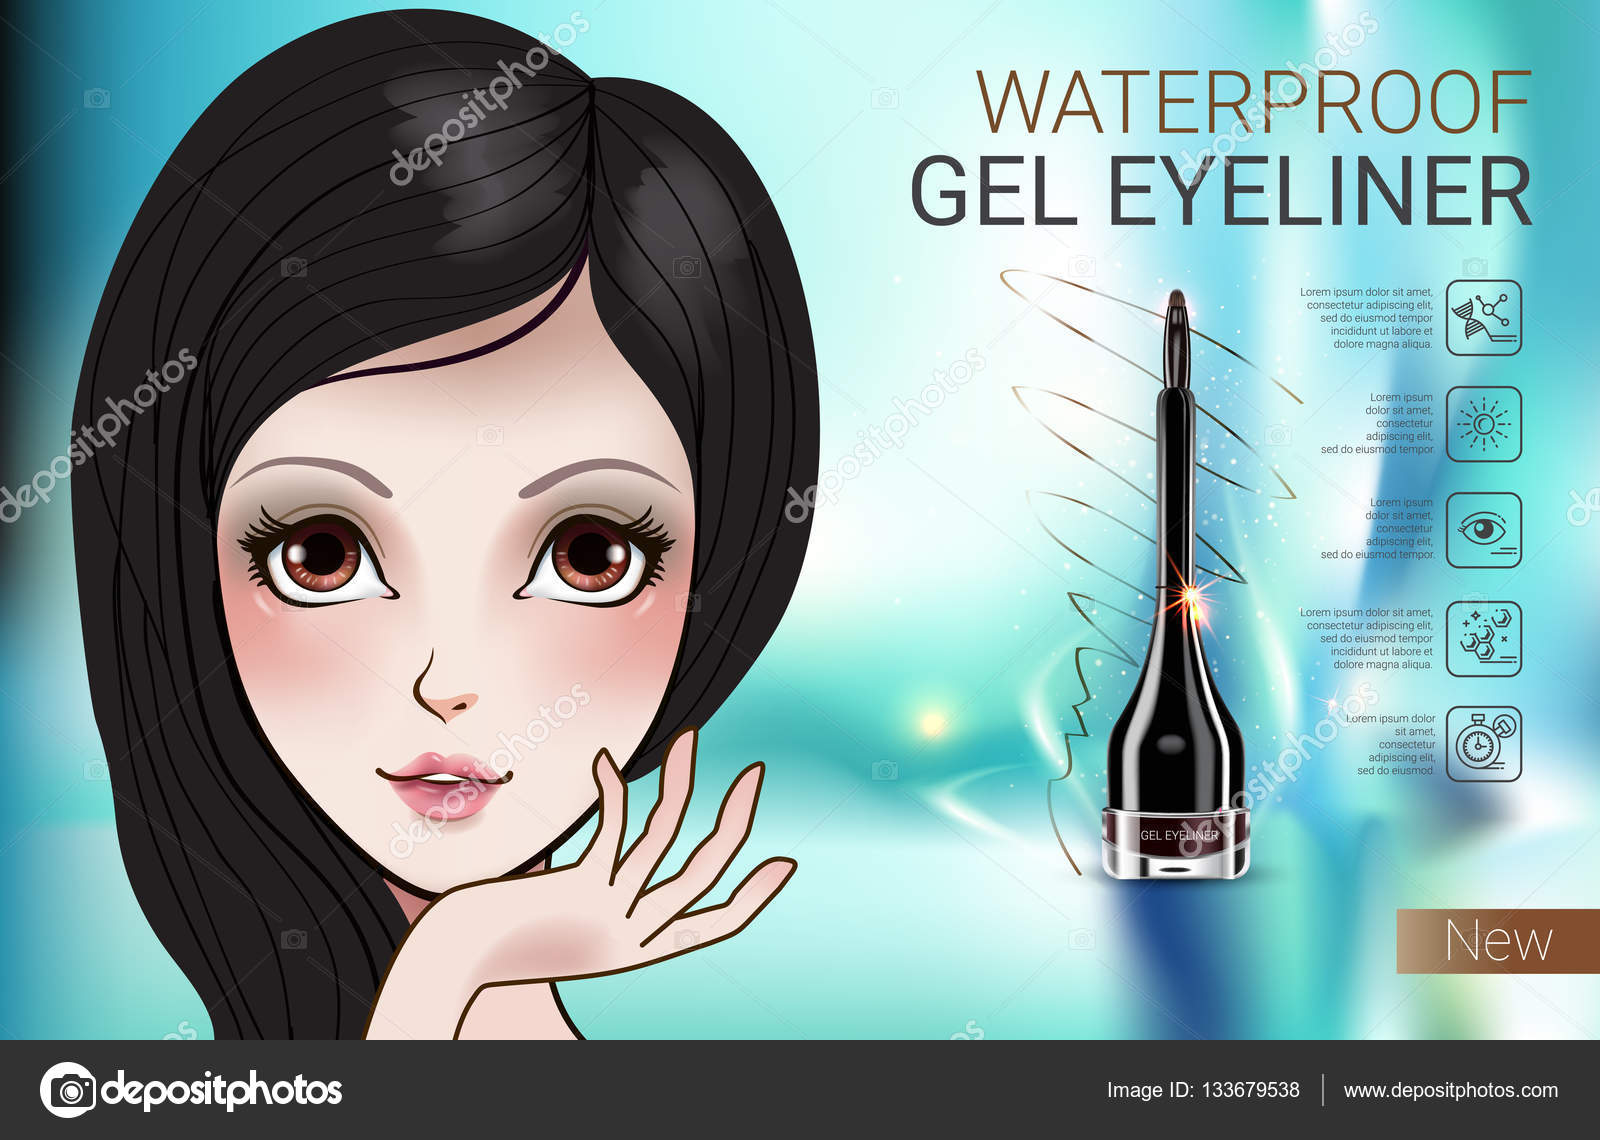 Vector Illustration with Manga style girl and gel eyeliner container. Stock Vector Image ©ant_art #133679538